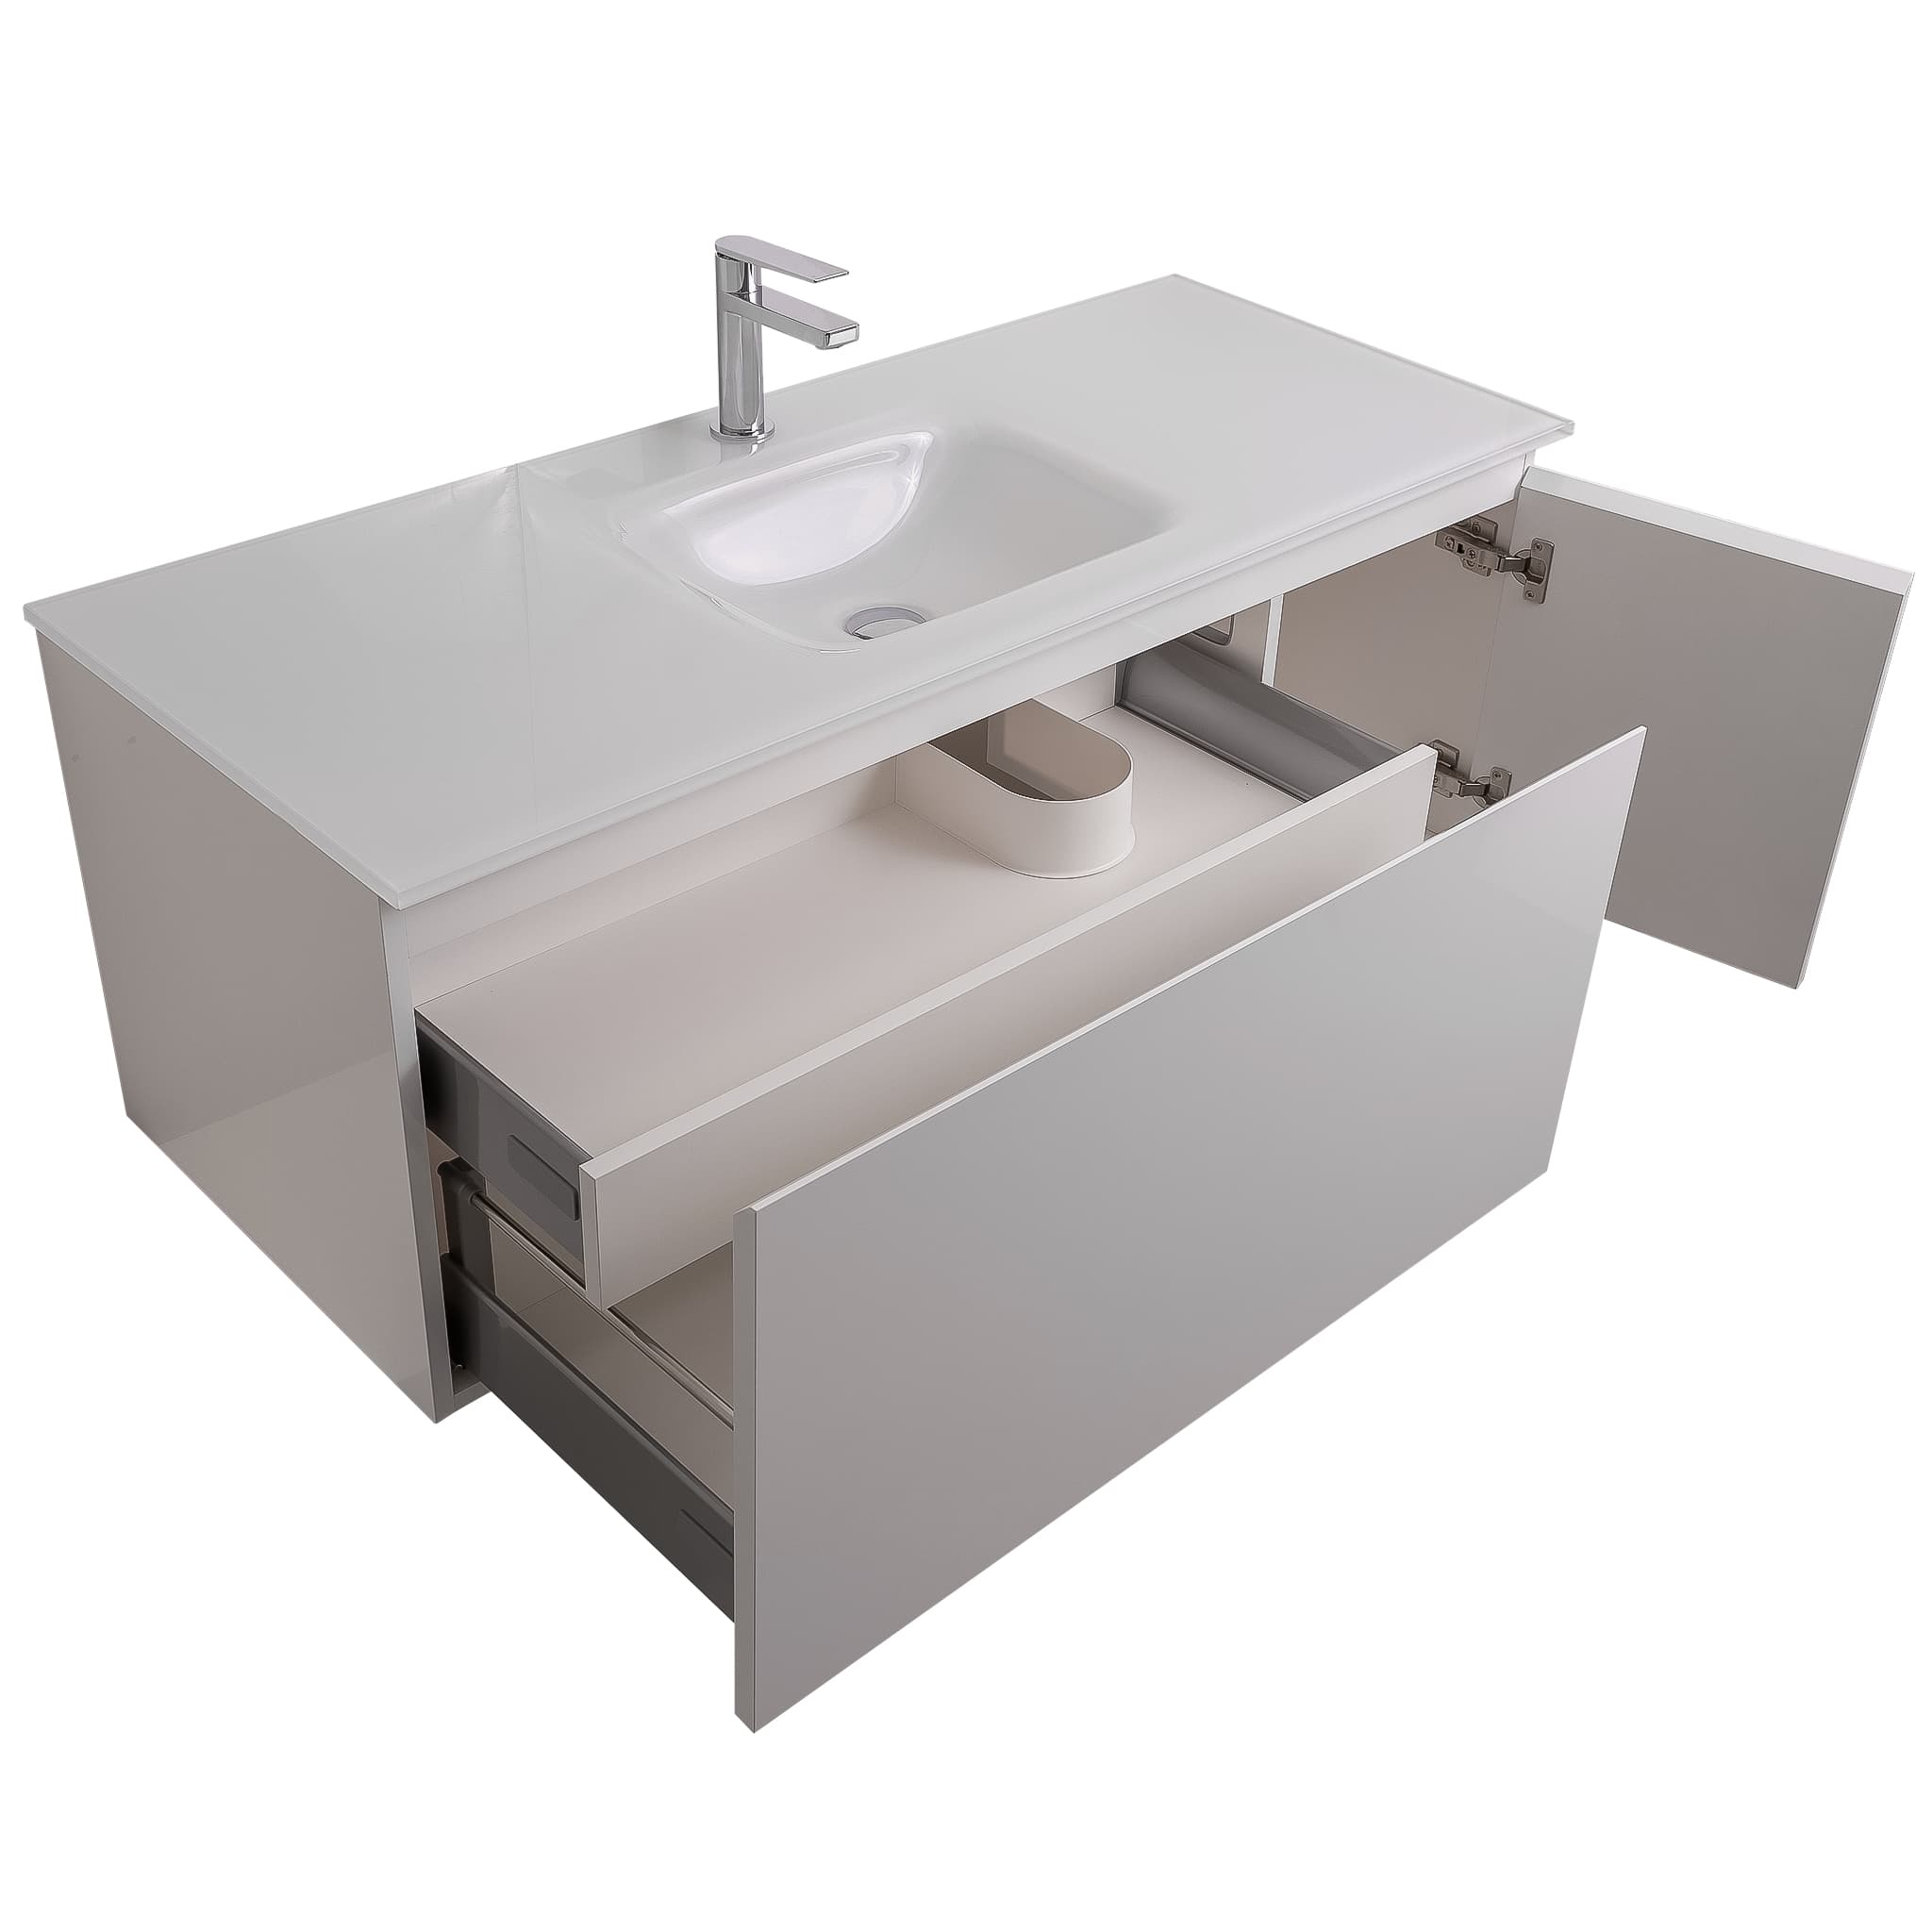 Venice 47.5 White High Gloss Cabinet, White Tempered Glass Sink, Wall Mounted Modern Vanity Set